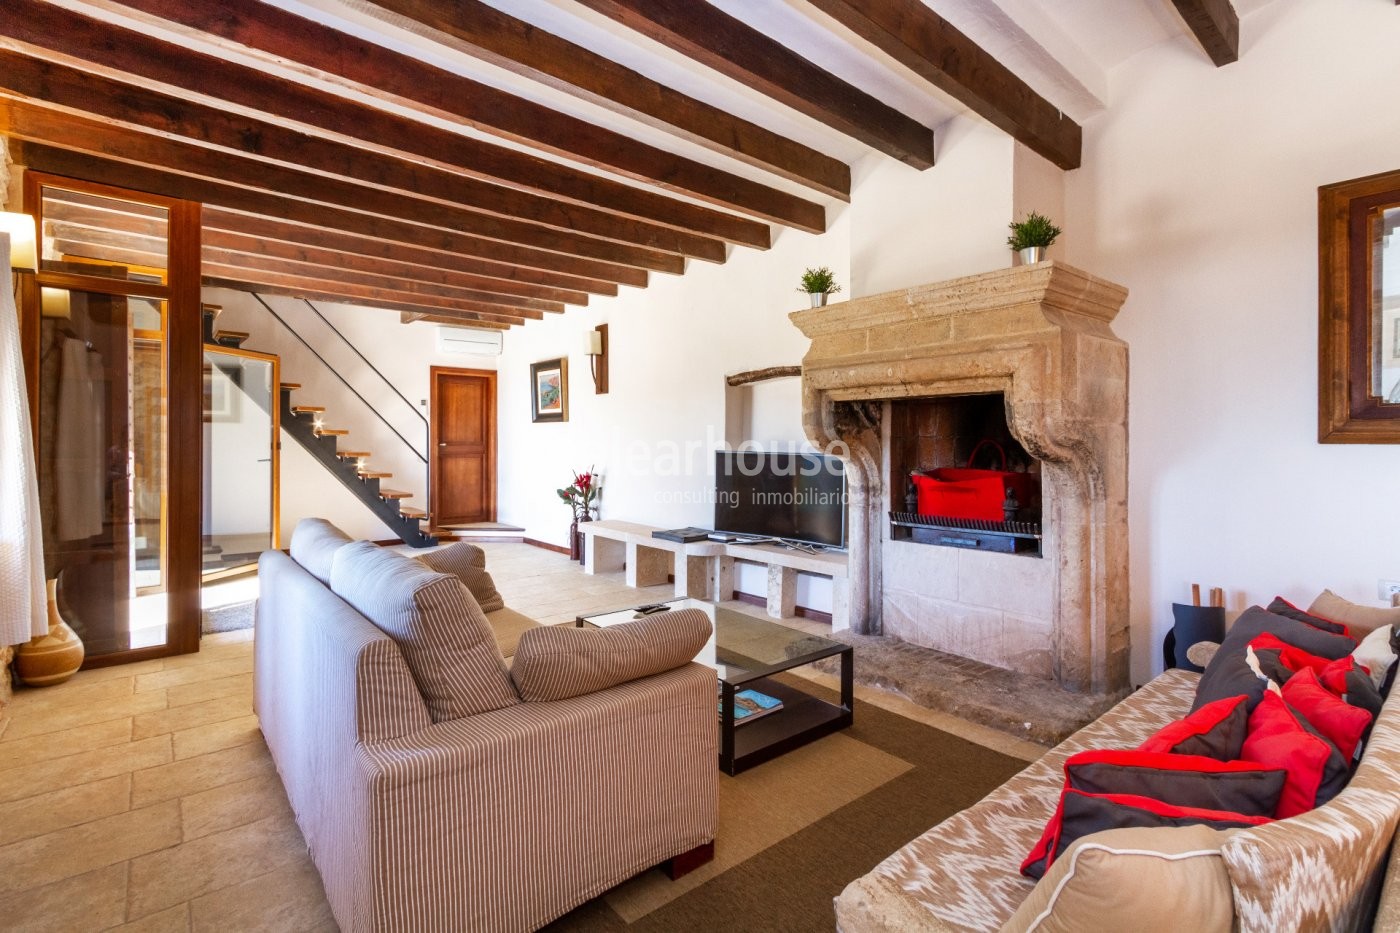 Recently renovated traditional Finca in a spectacular setting with views to the sea.